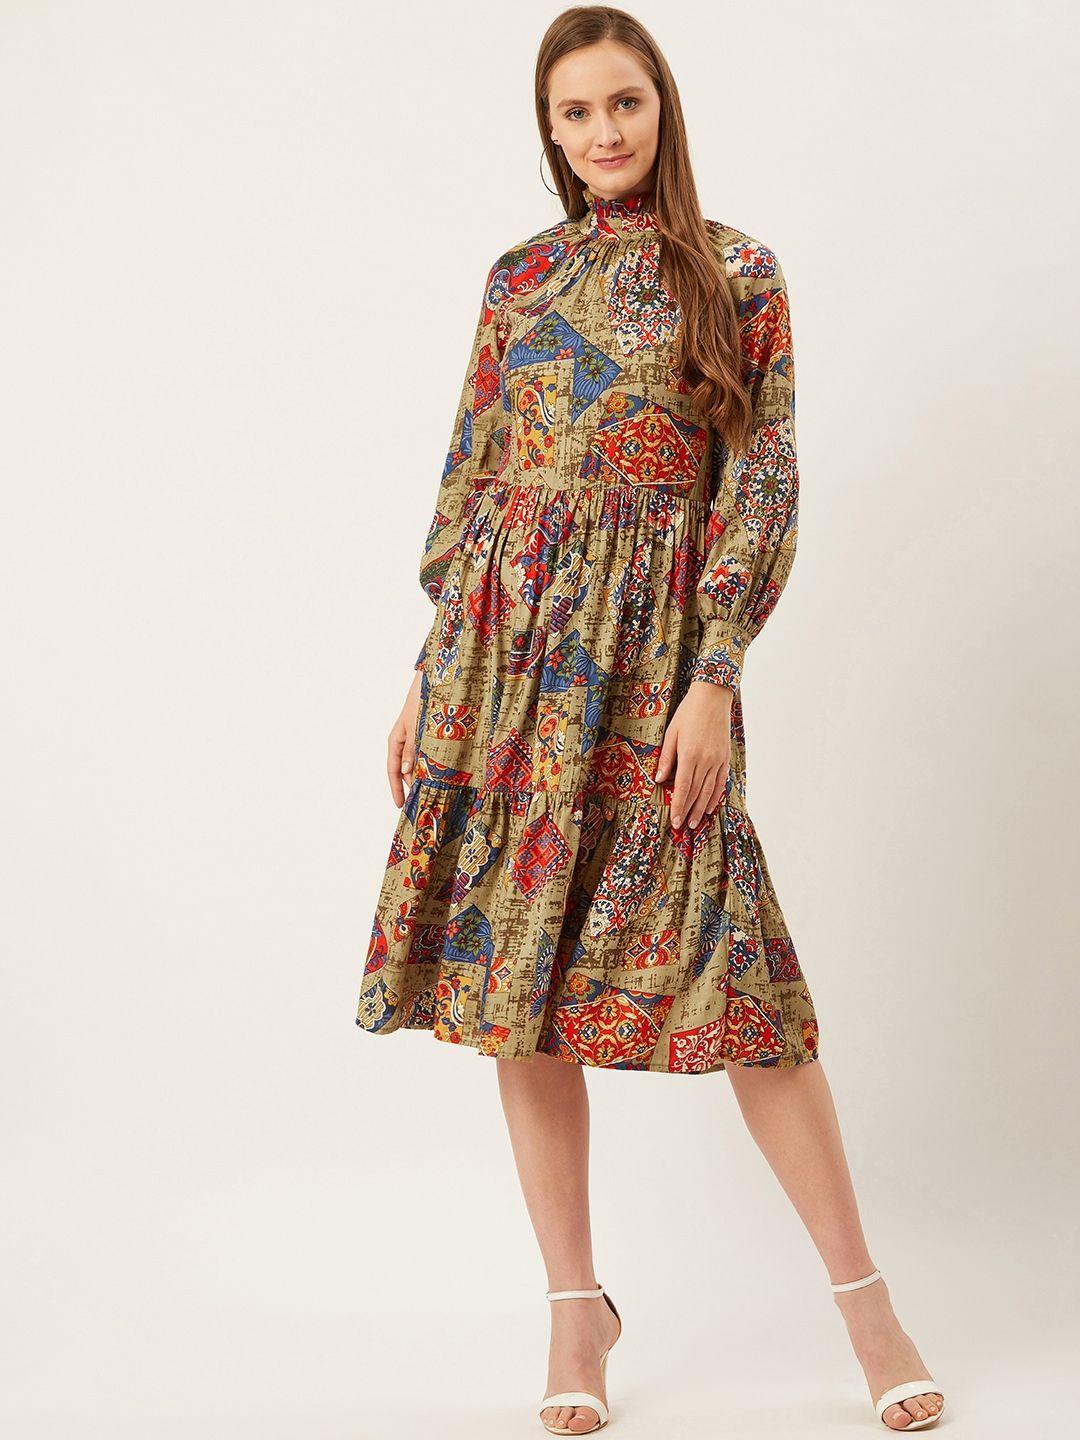 alsace-lorraine-paris-women-olive-green-&-red-printed-a-line-tiered-dress